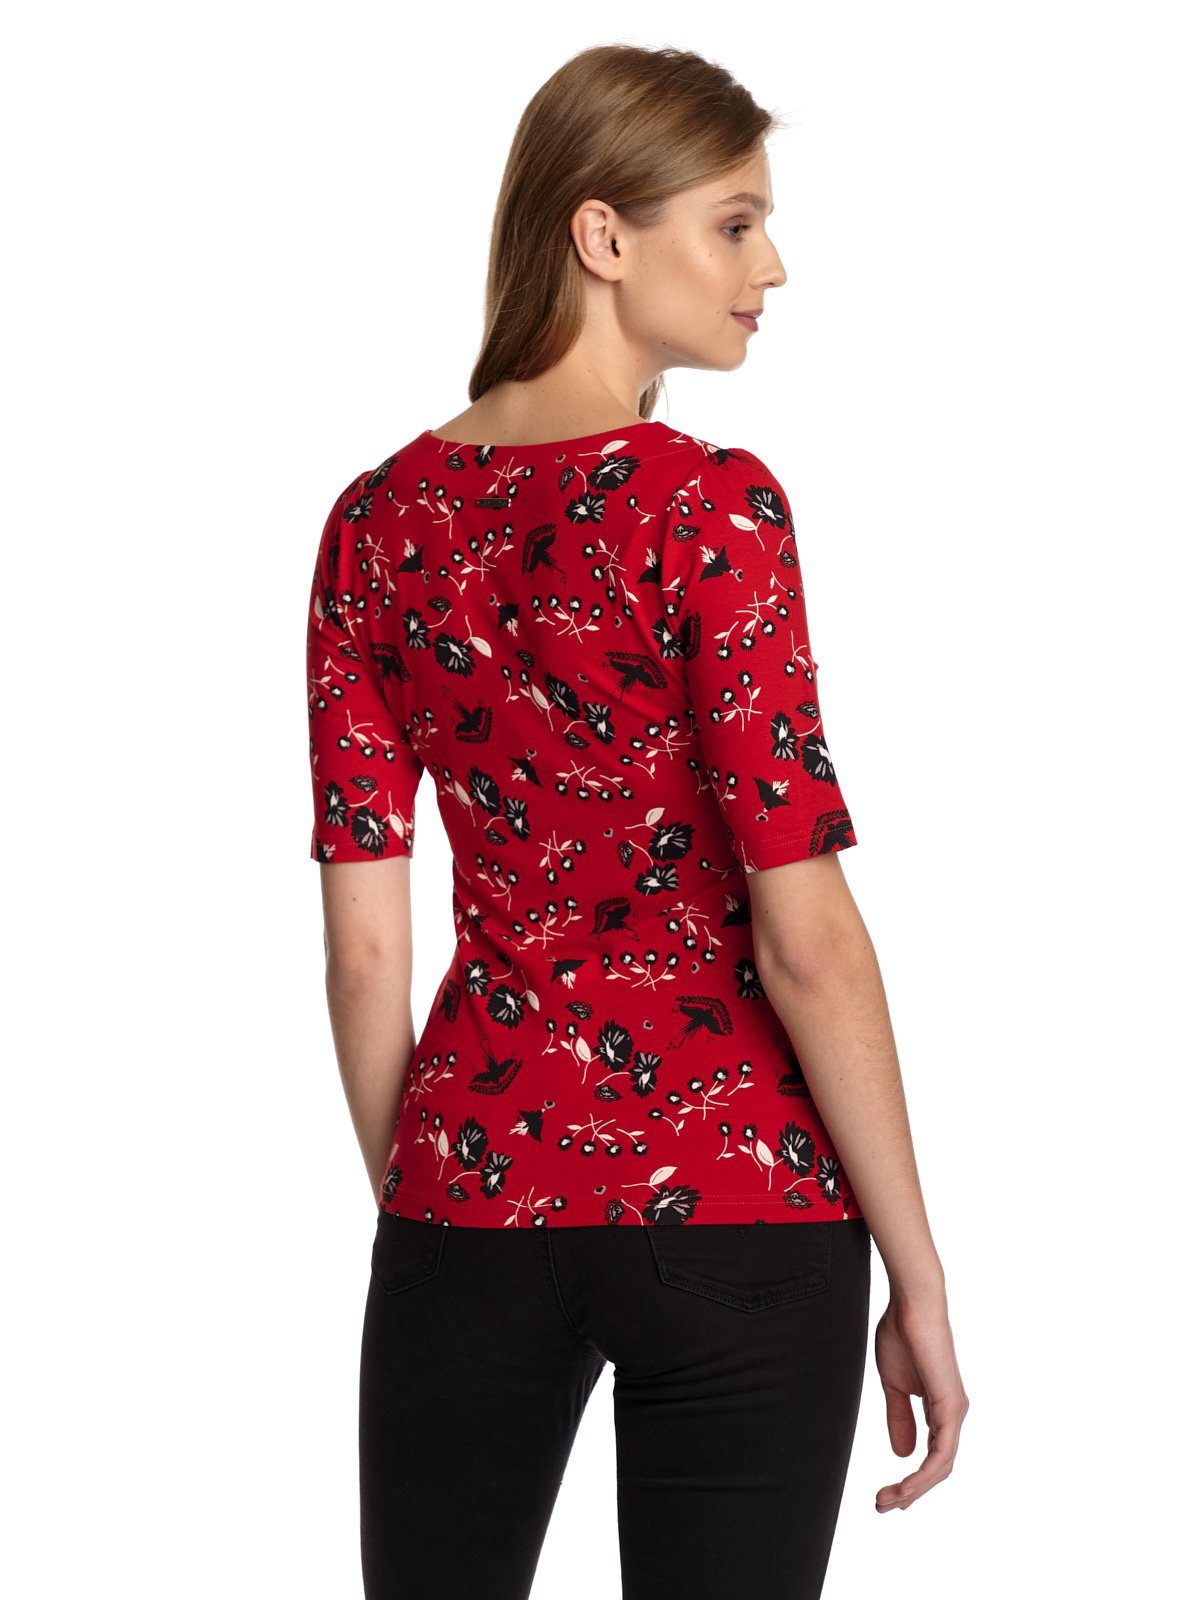 Vive T-Shirt Flower Red Maria